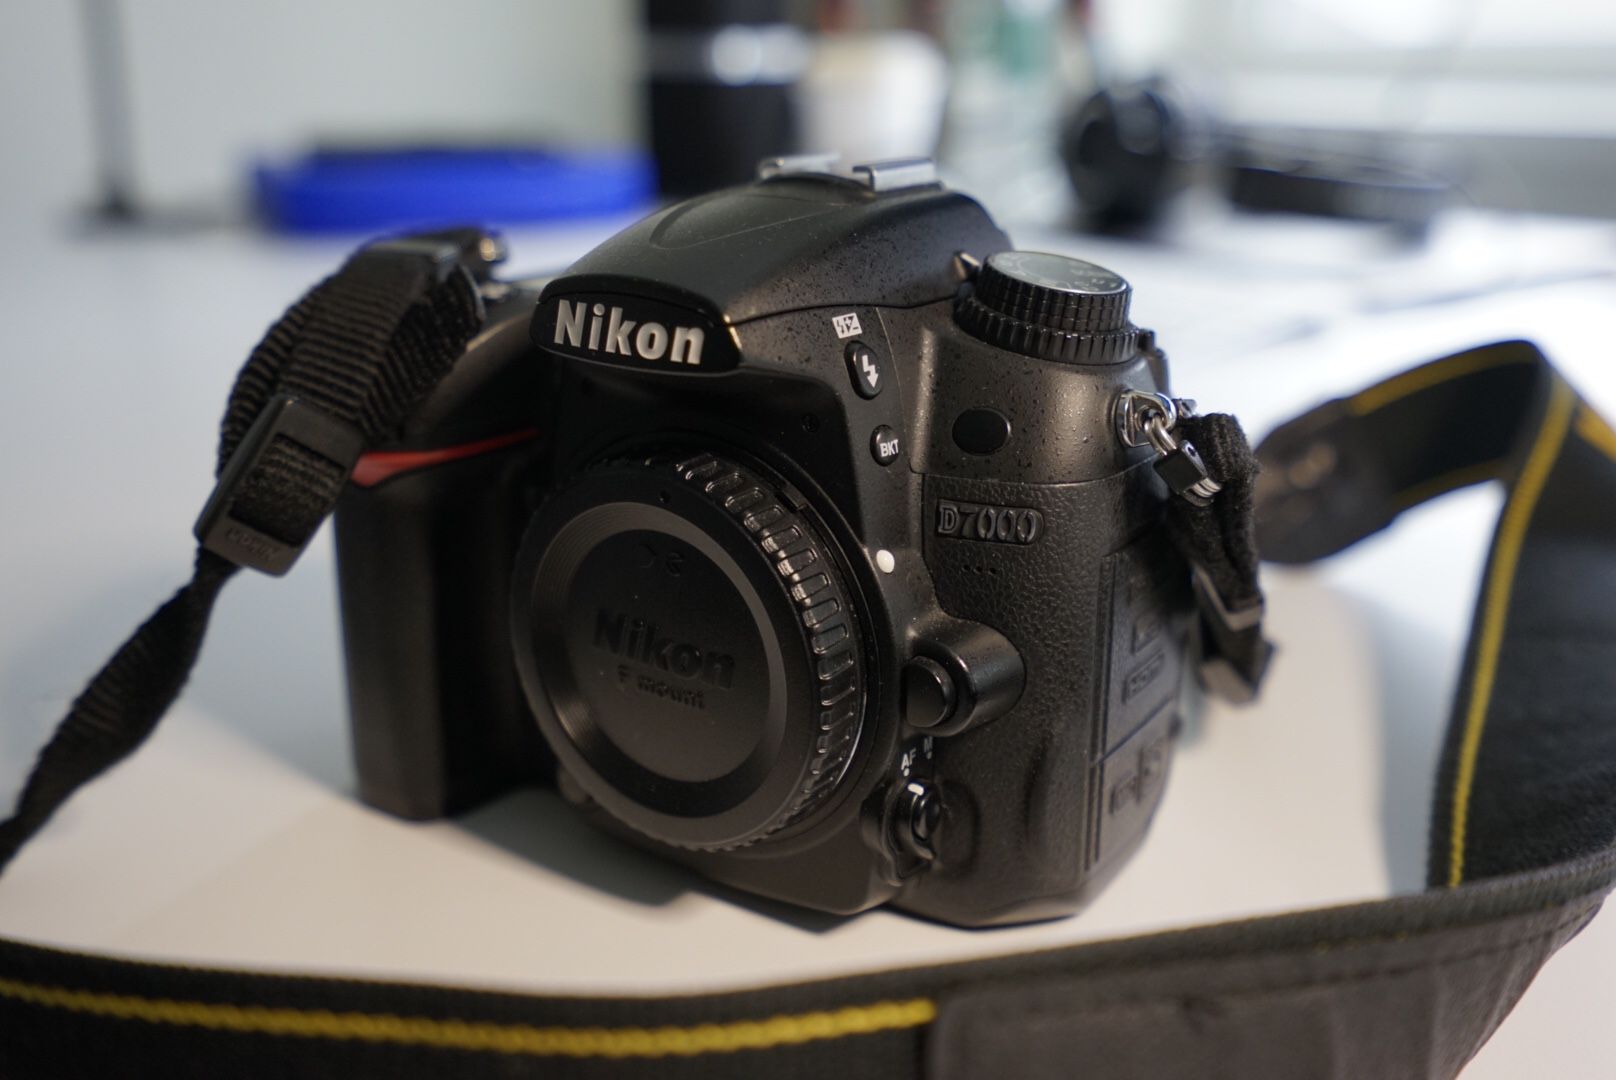 Nikon D7000 with all original accessories and box